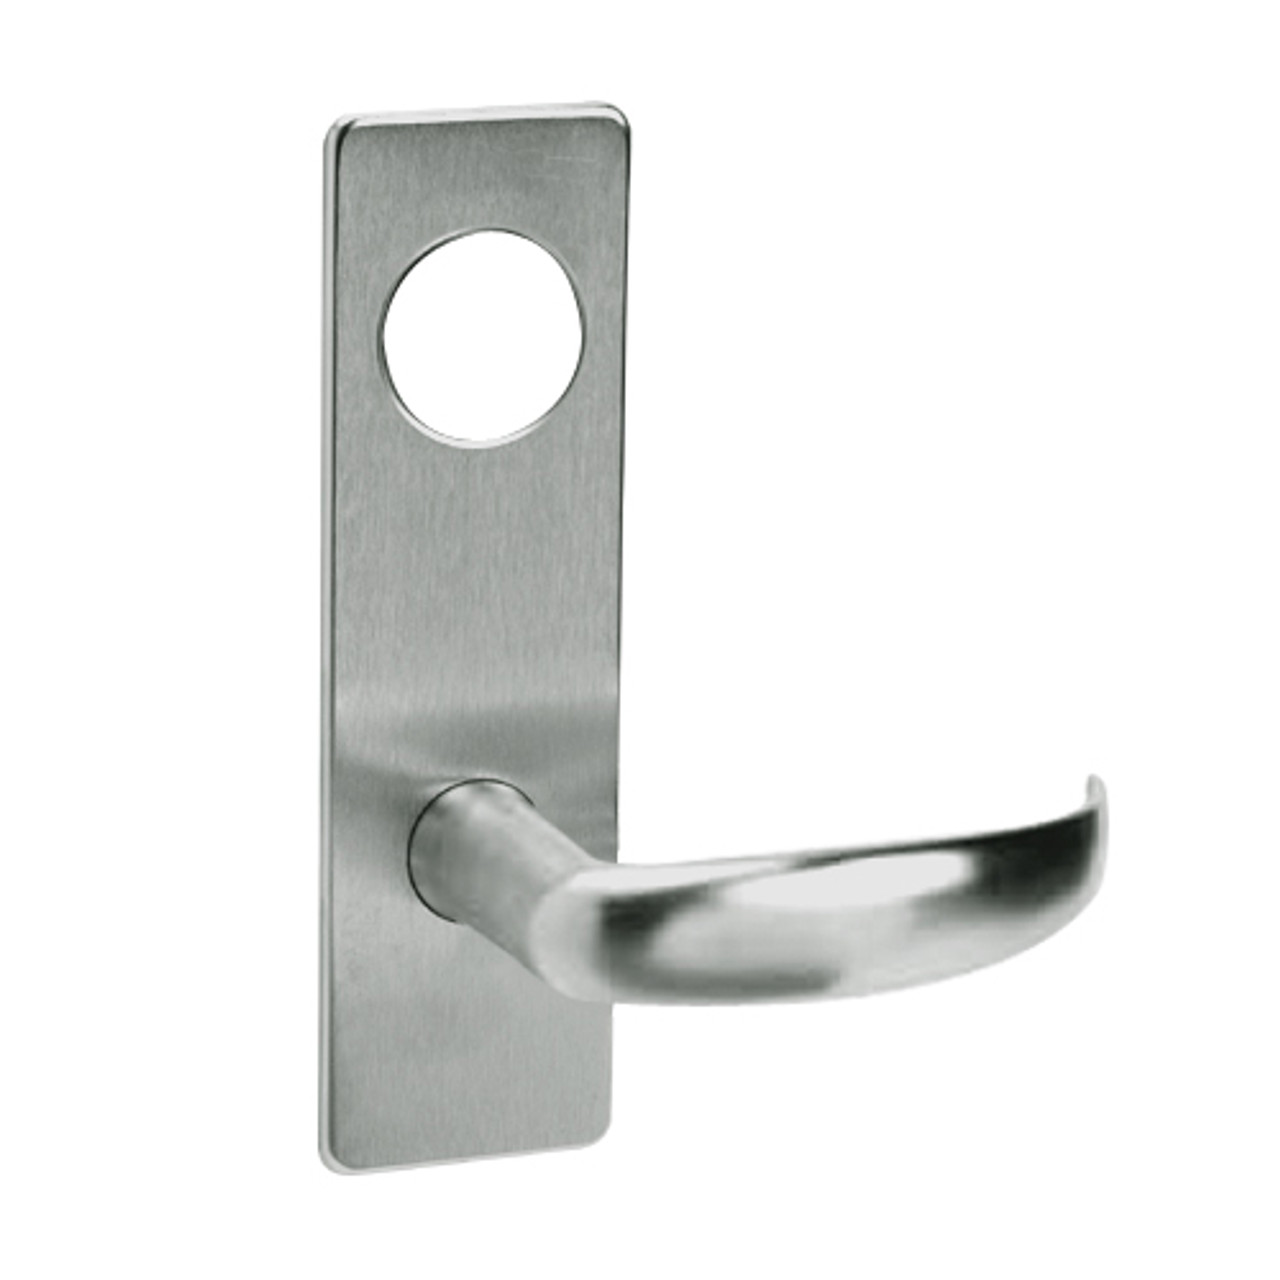 ML2051-PSM-619-M31 Corbin Russwin ML2000 Series Mortise Office Trim Pack with Princeton Lever in Satin Nickel